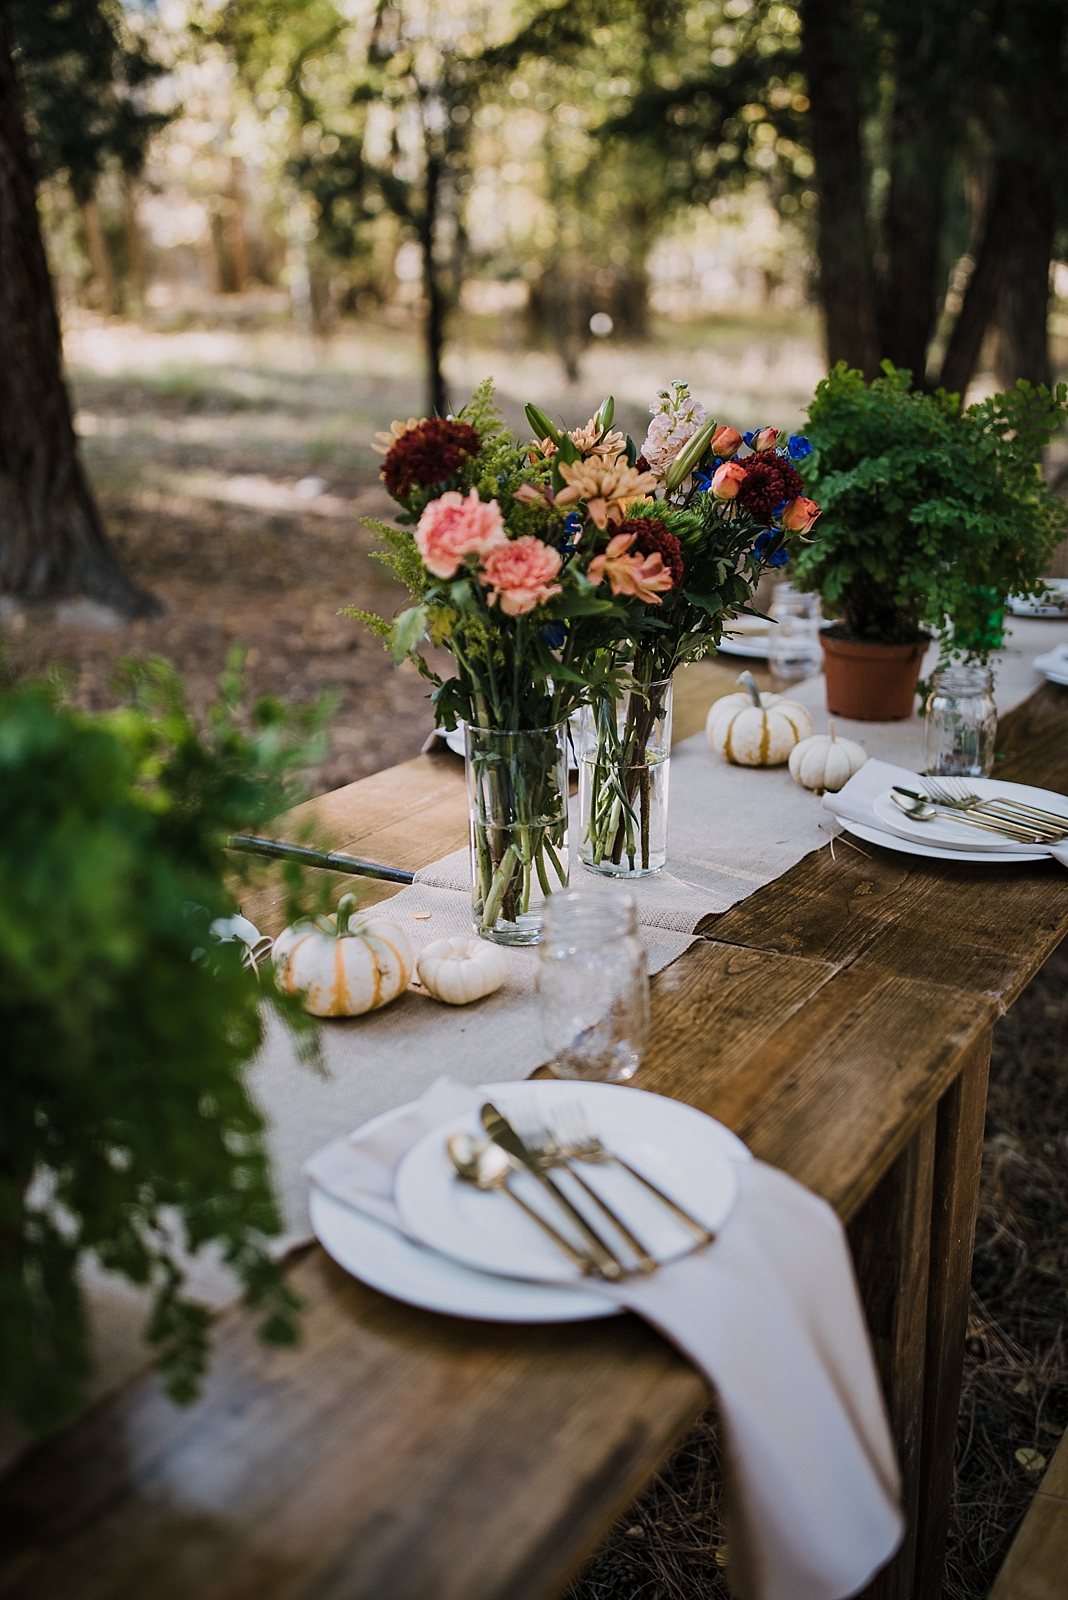 dinner table in the woods, post elopement celebration, wedding in the woods, buena vista elopement, buena vista wedding, nathrop colorado wedding, adventurous colorado elopement, bv farmers market